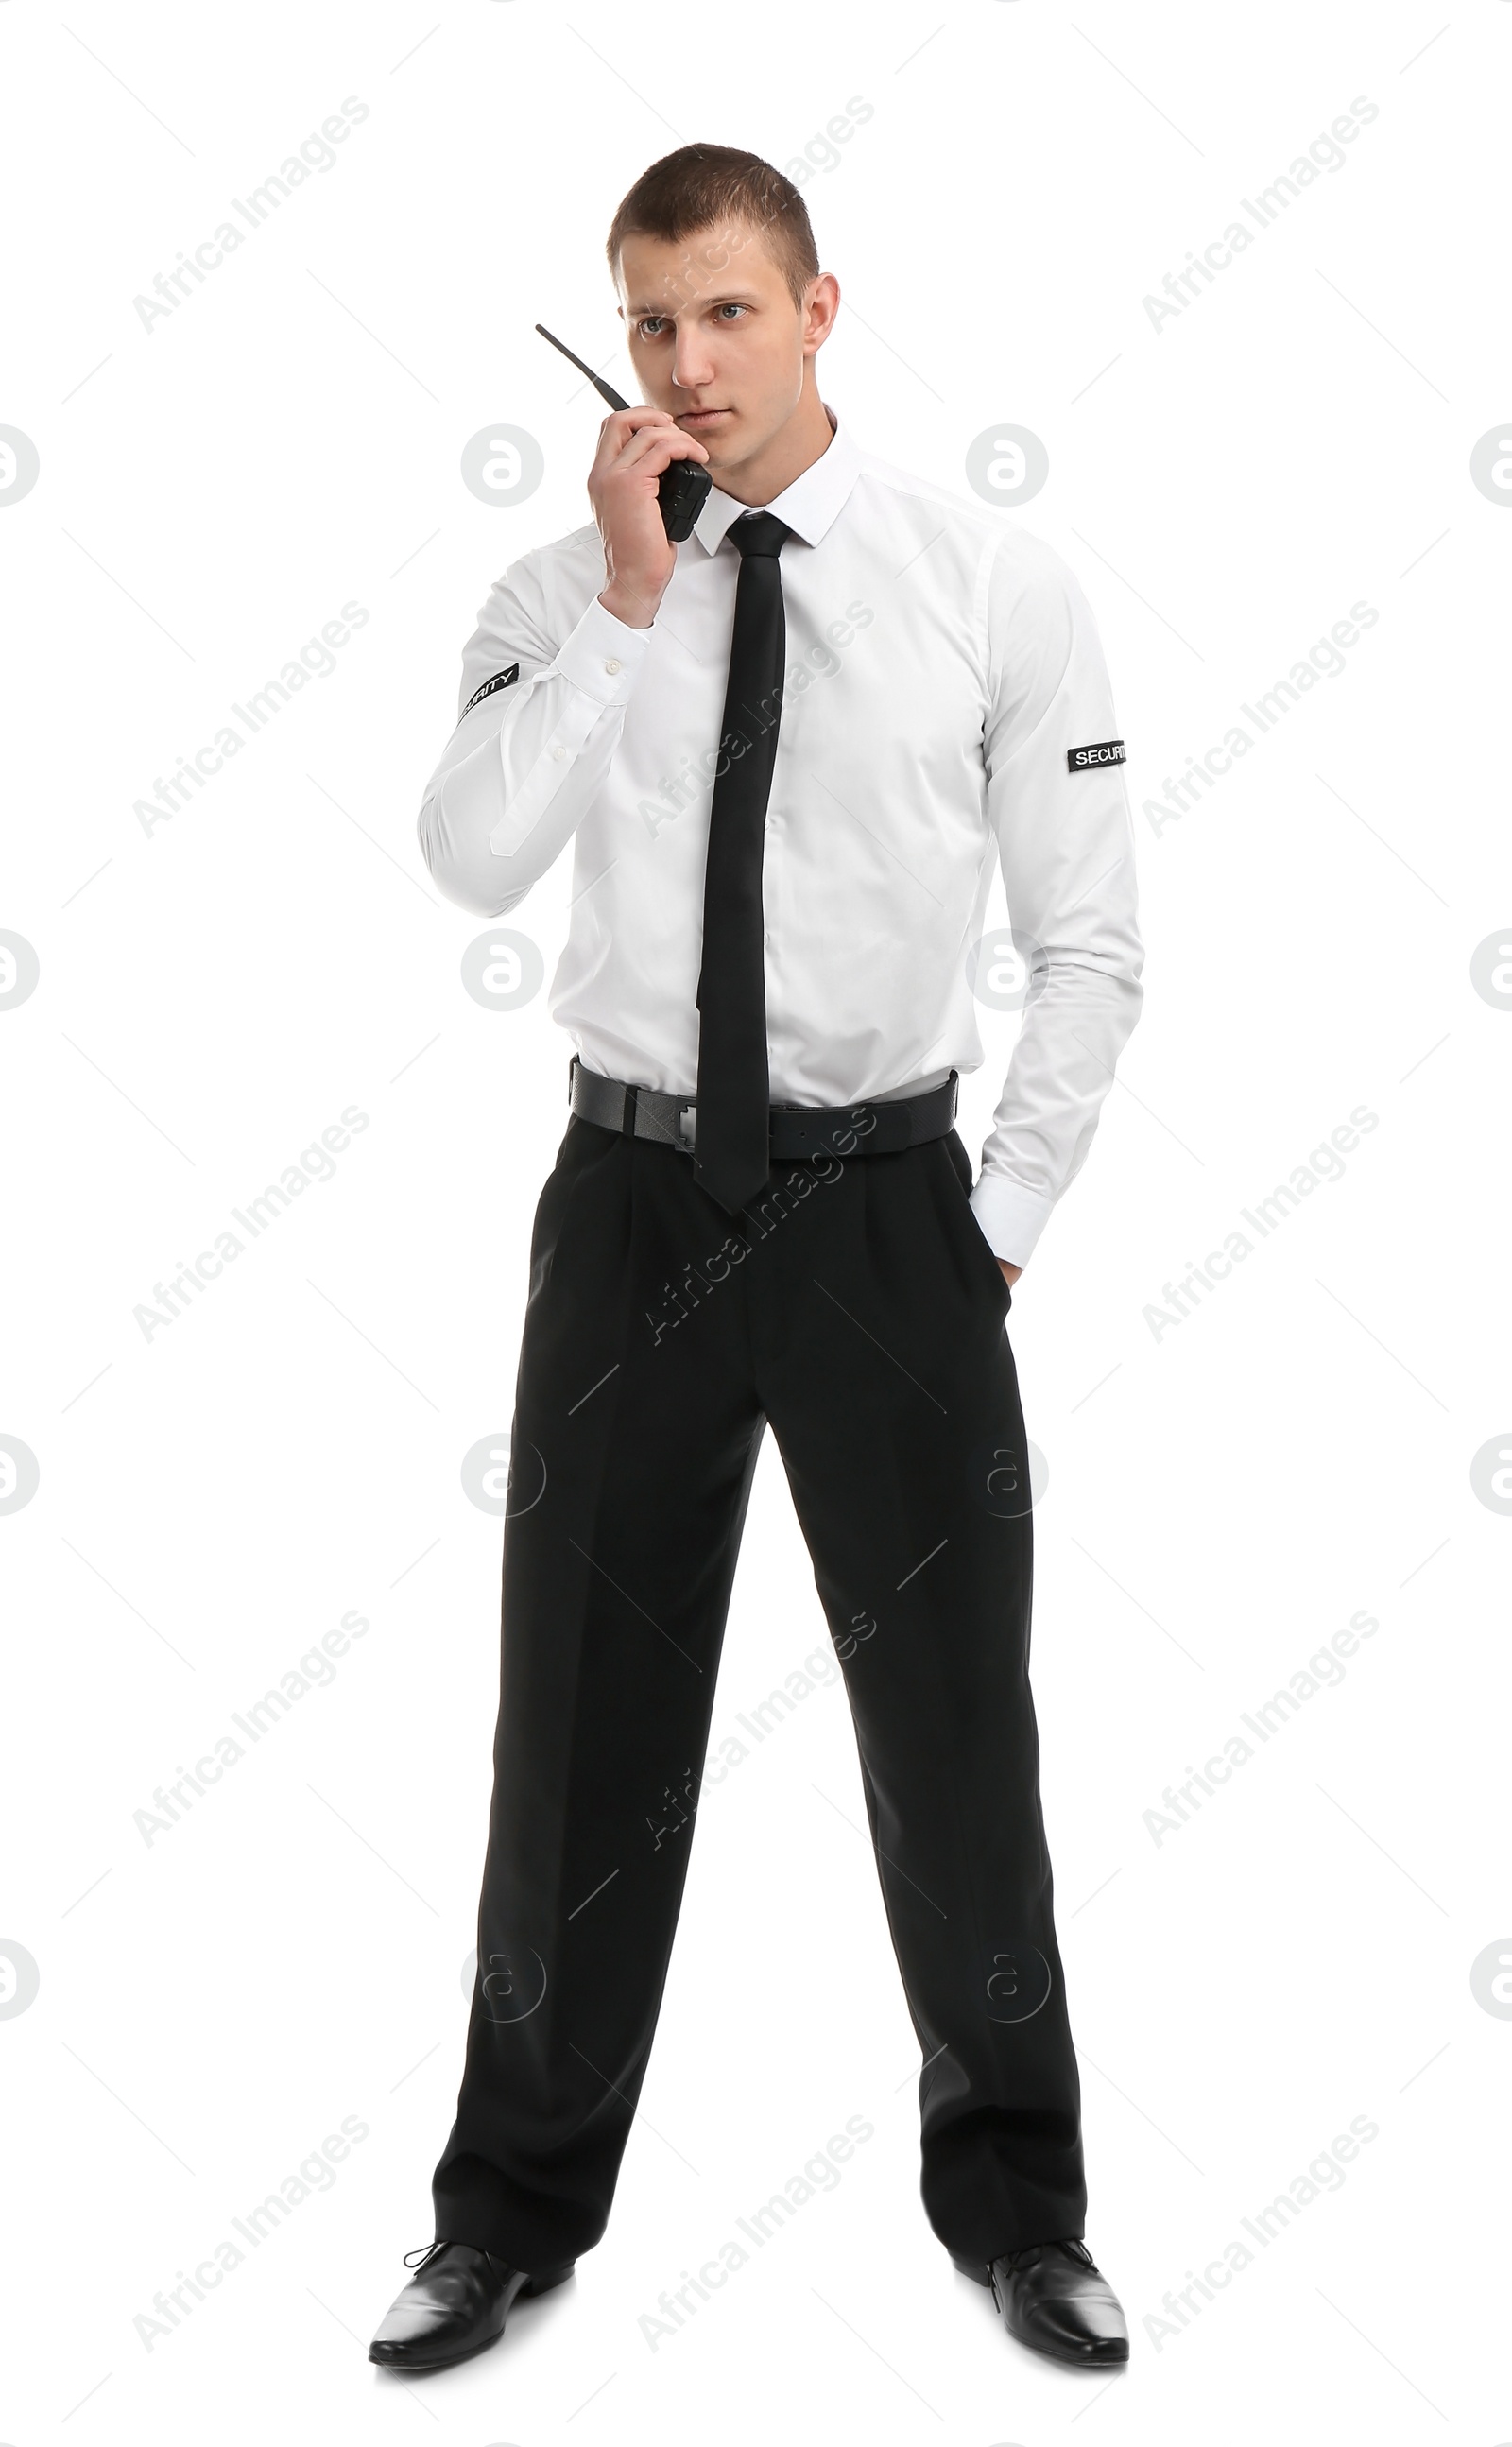 Photo of Male security guard using portable radio transmitter on white background